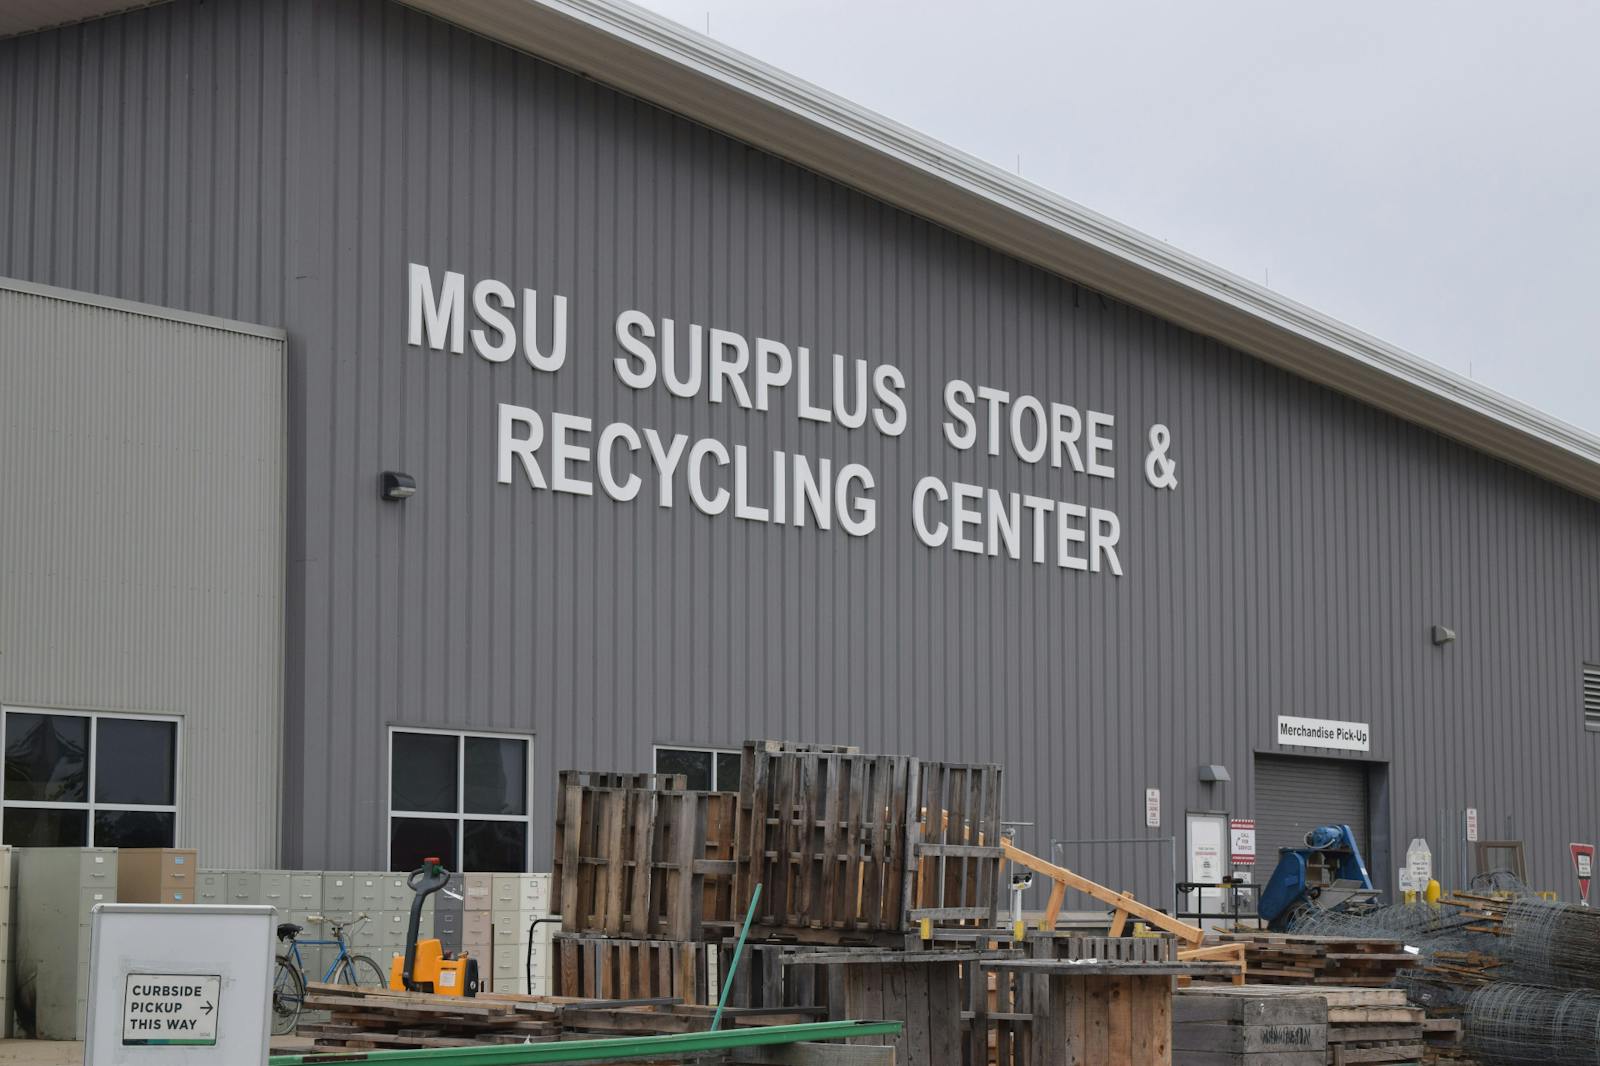 MSU Surplus Store & Recycling Center team collects 500,000 pounds of